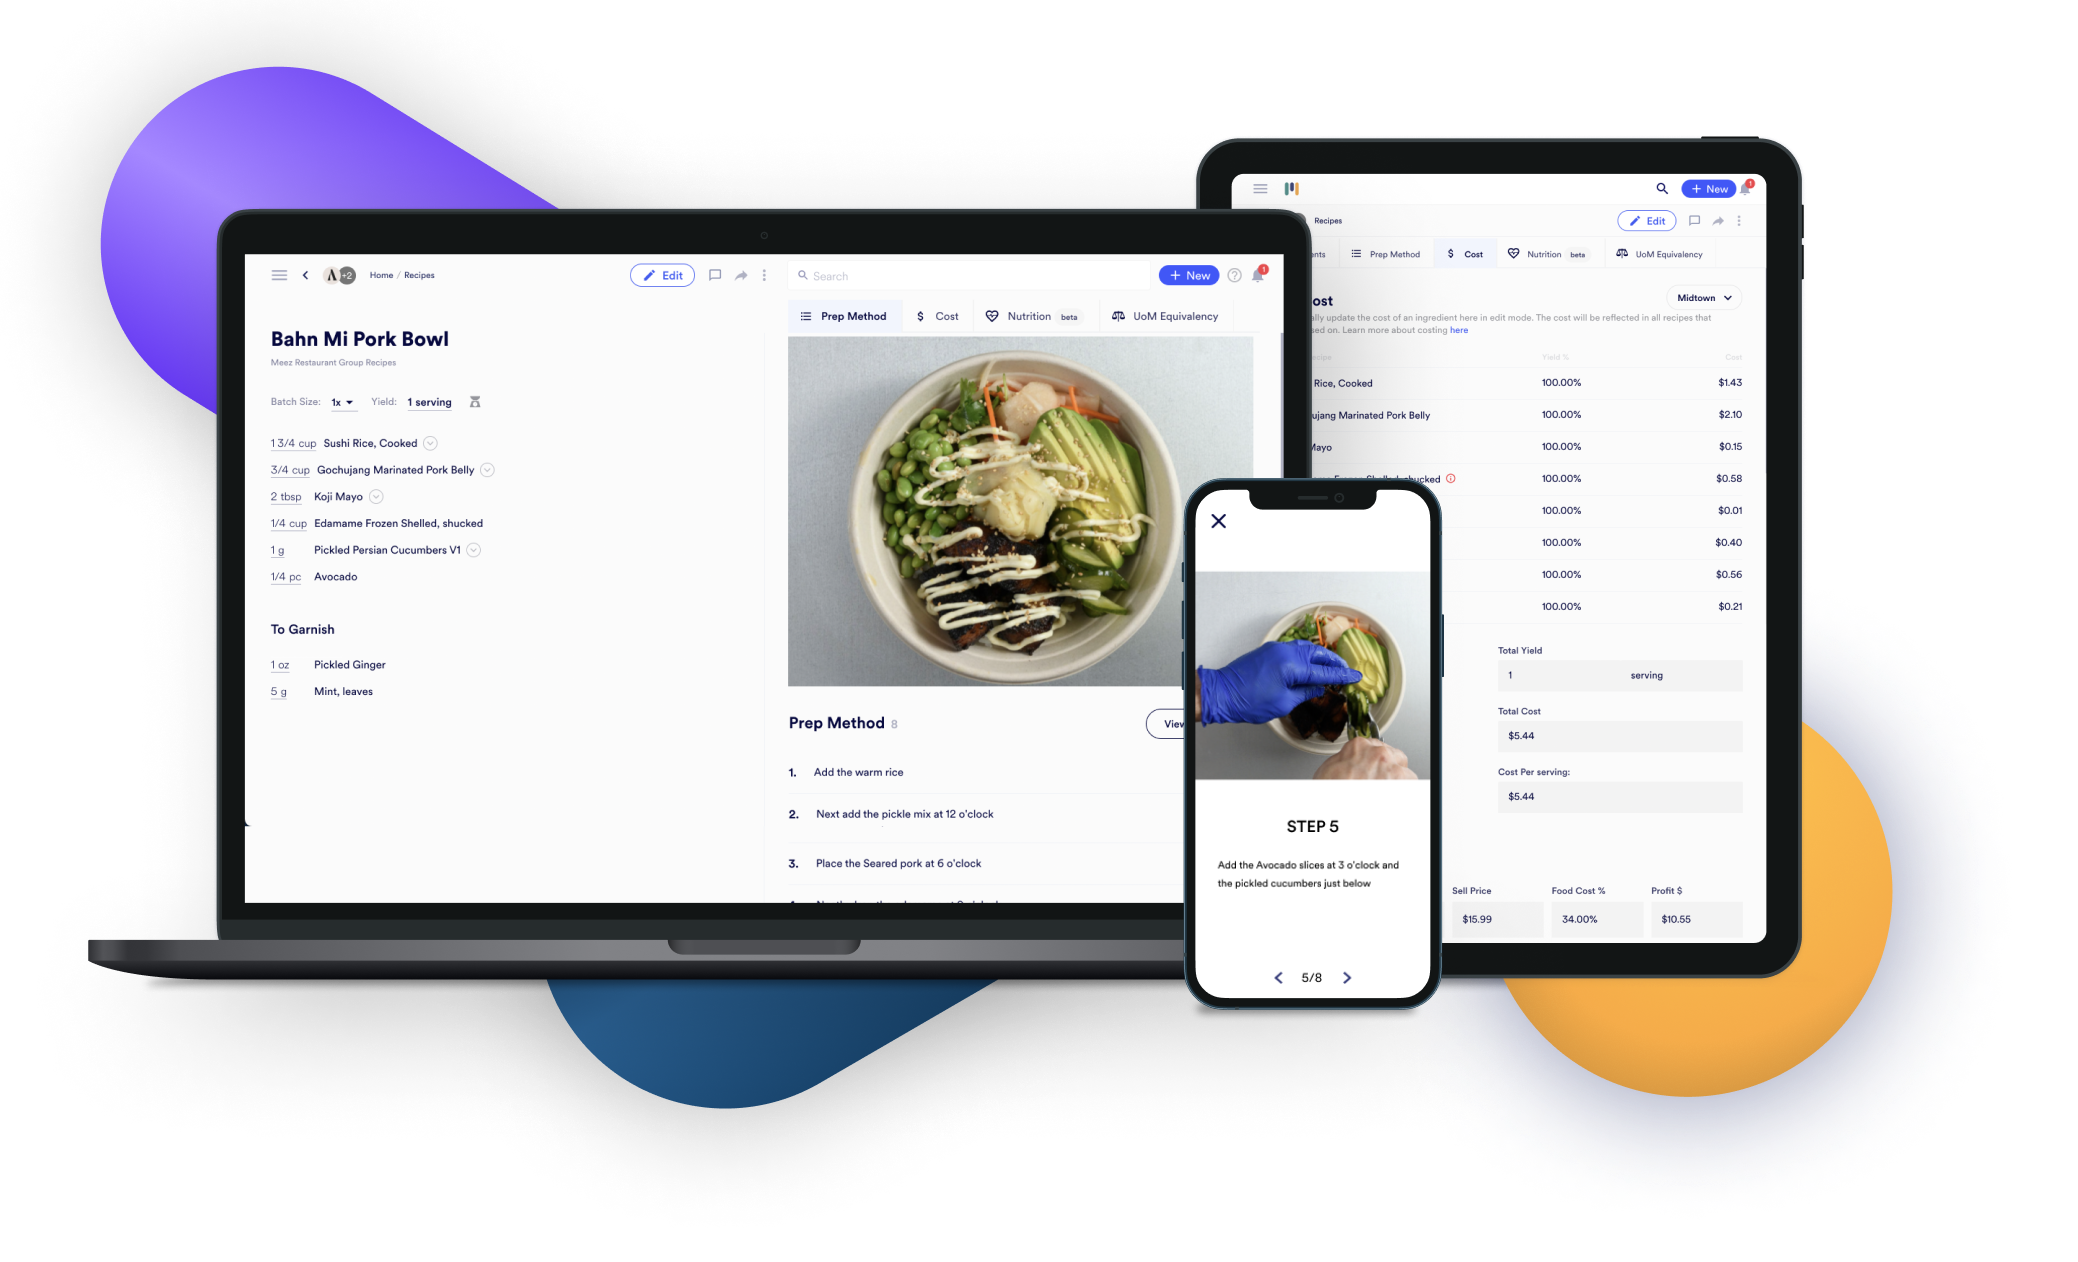 Chefs can use meez on desktop, tablet or mobile devices. Import recipes easily from any file type, drag and drop photos, map ingredients for food costing.